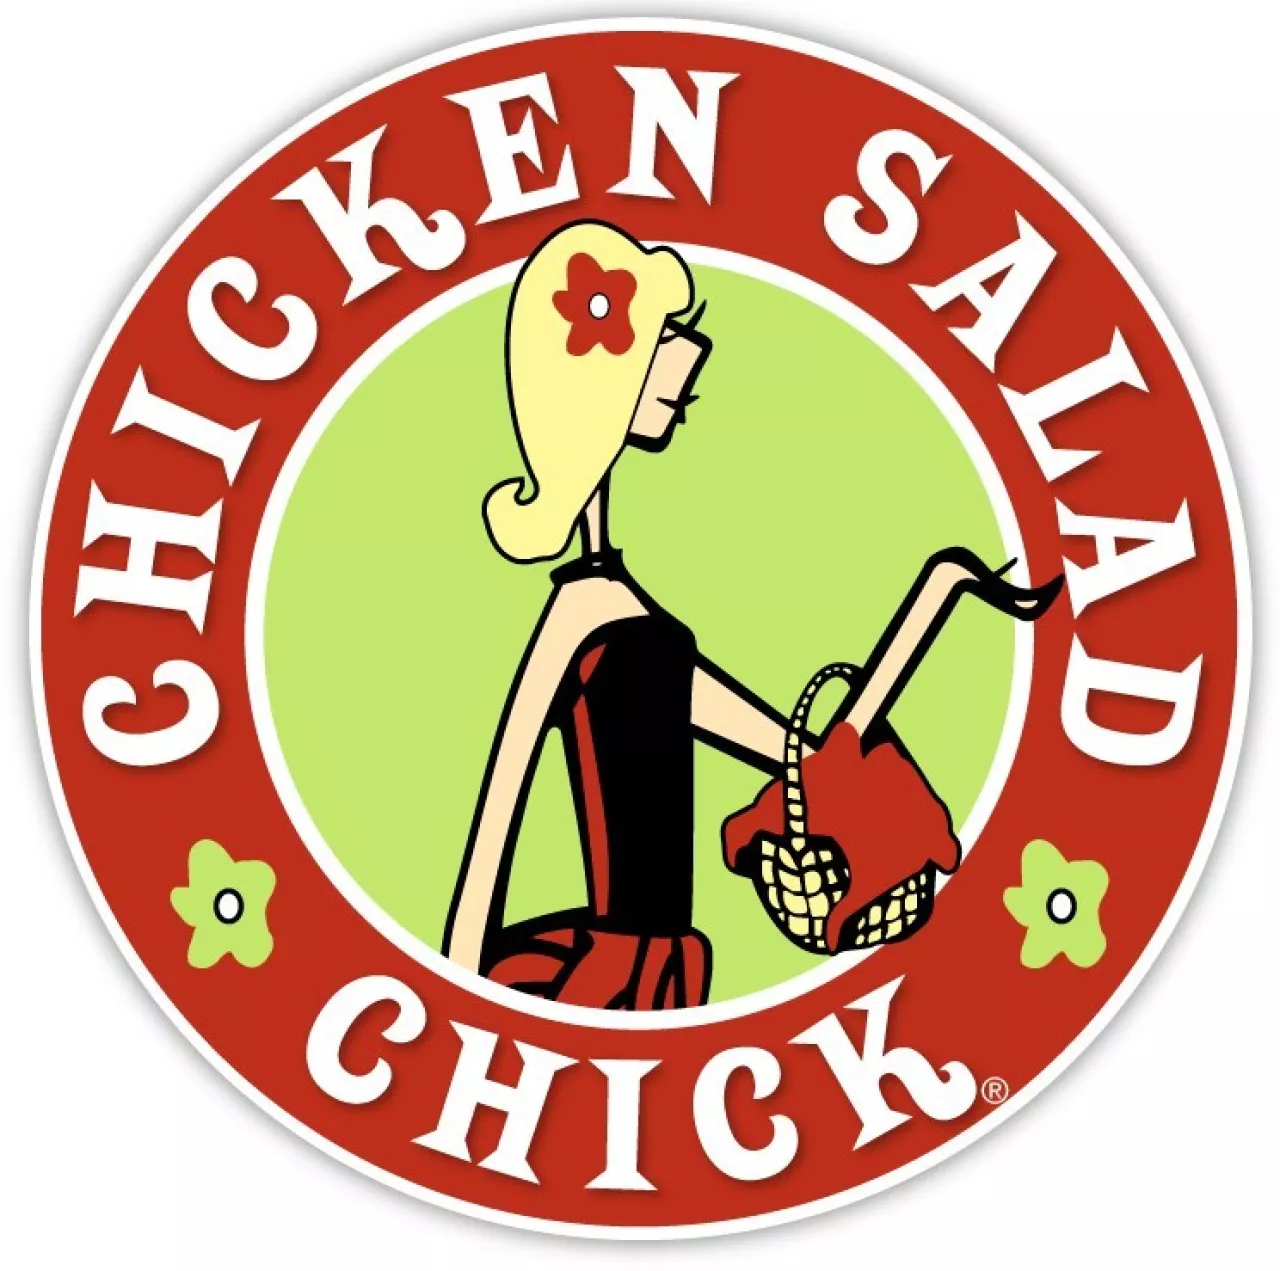 Chicken Salad Chick to open its first Fort Wayne restaurant, April 26 img#1